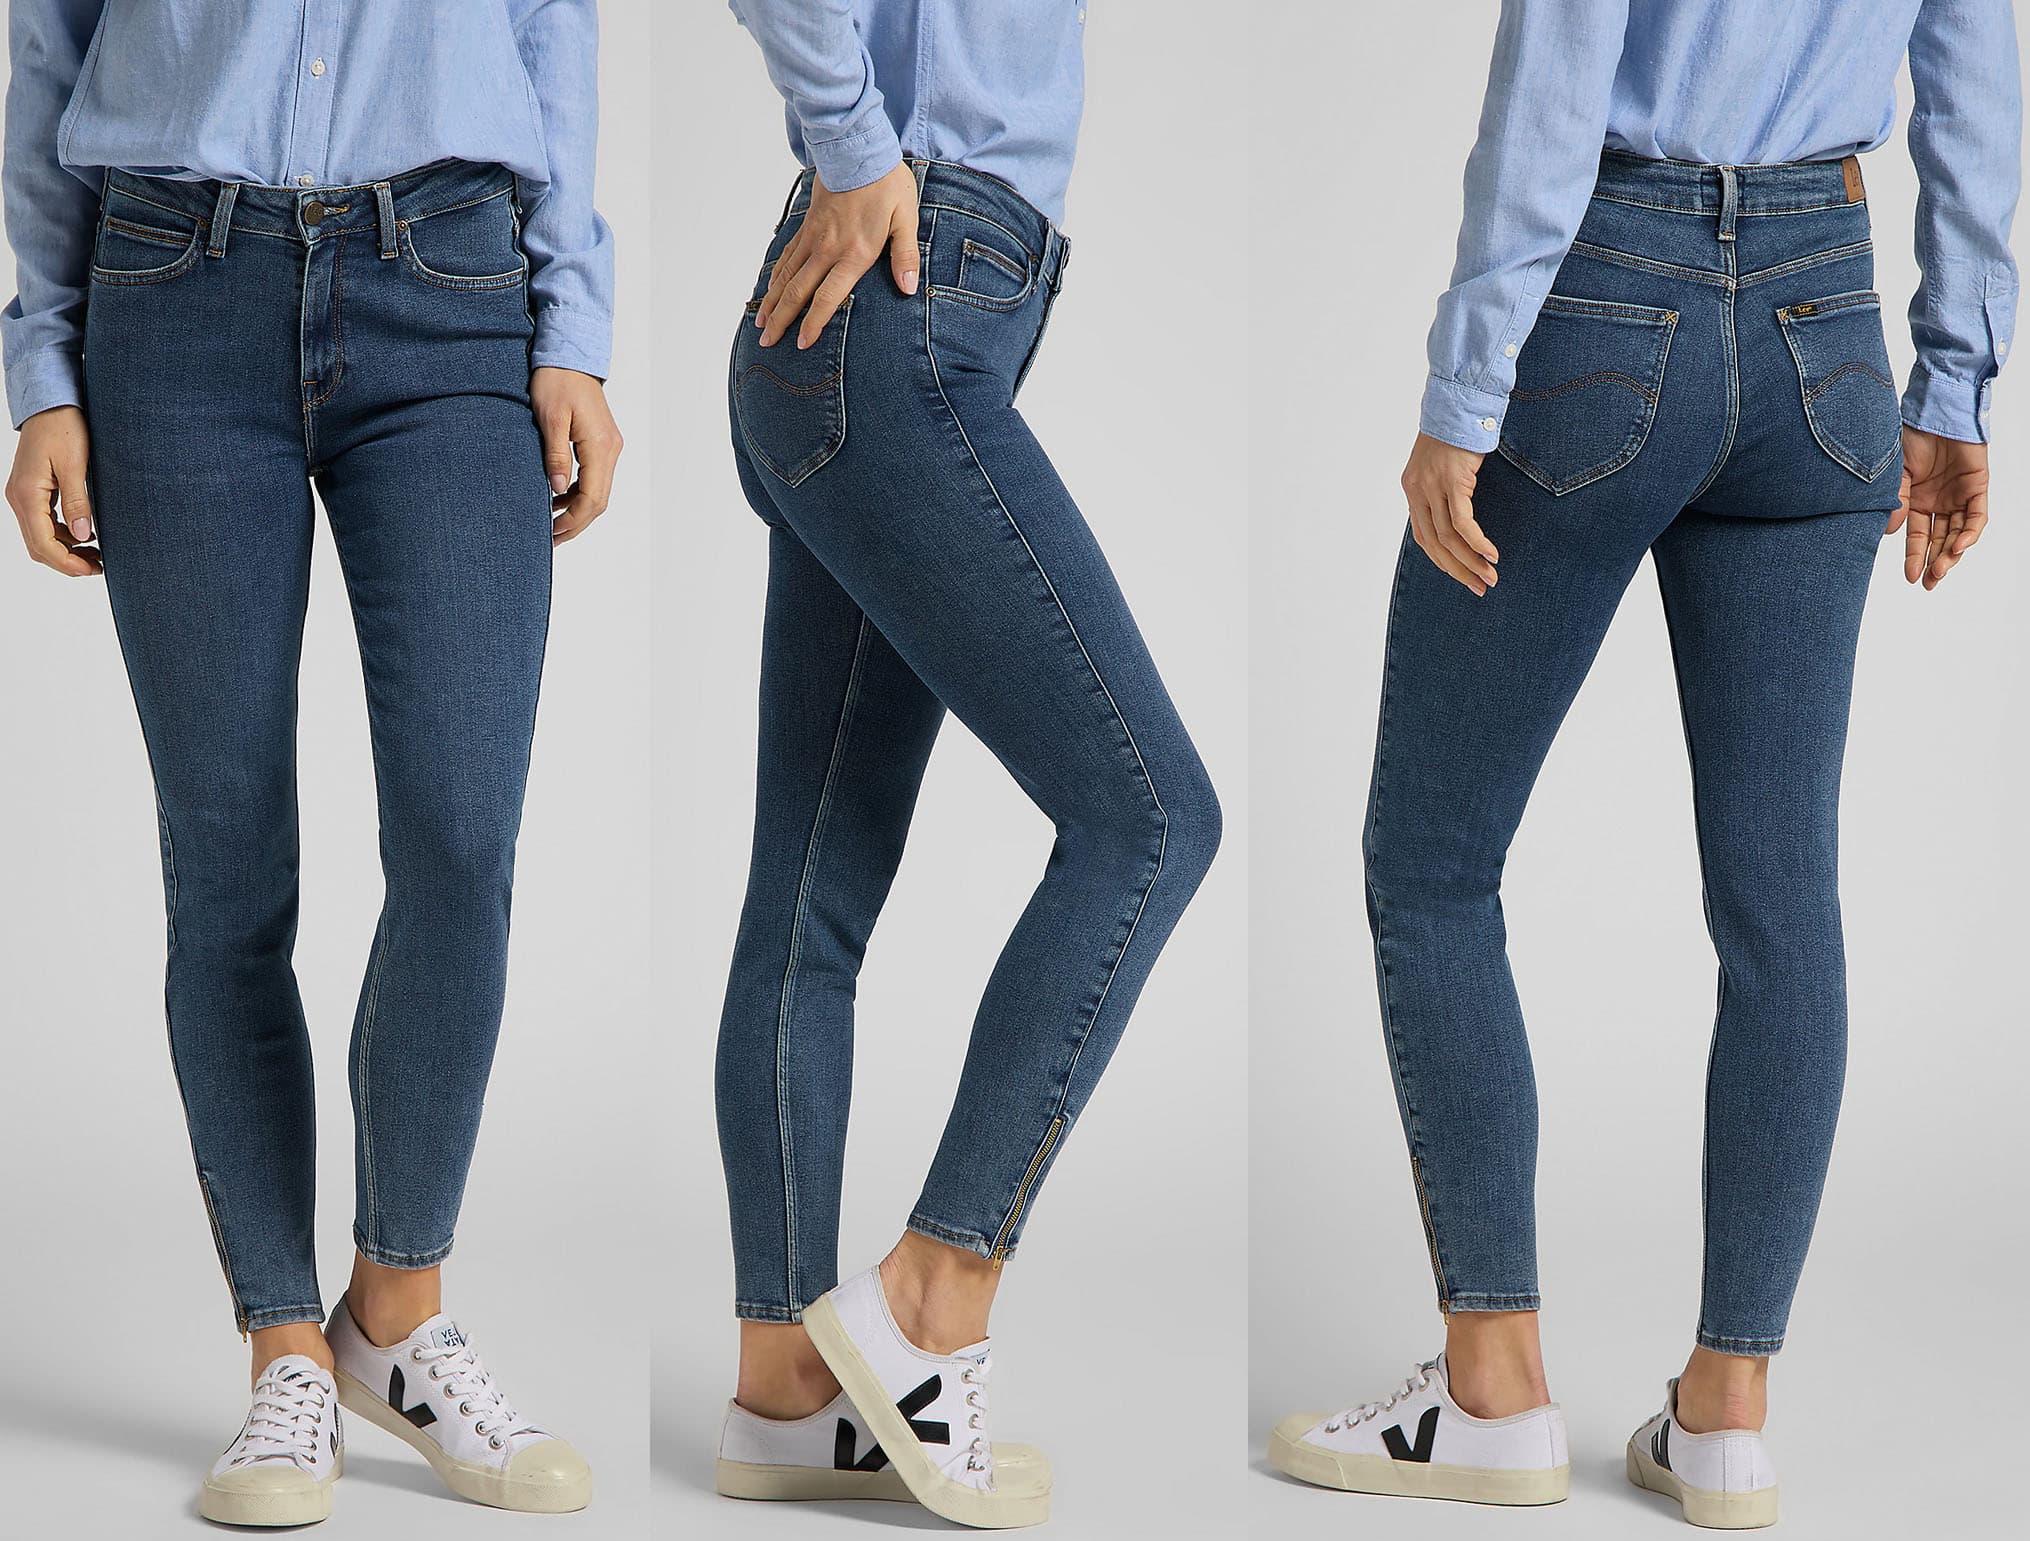 Offering the ultimate flattering fit, the Lee Scarlett high-waisted jeans feature a cropped zipped seam and a high stretch